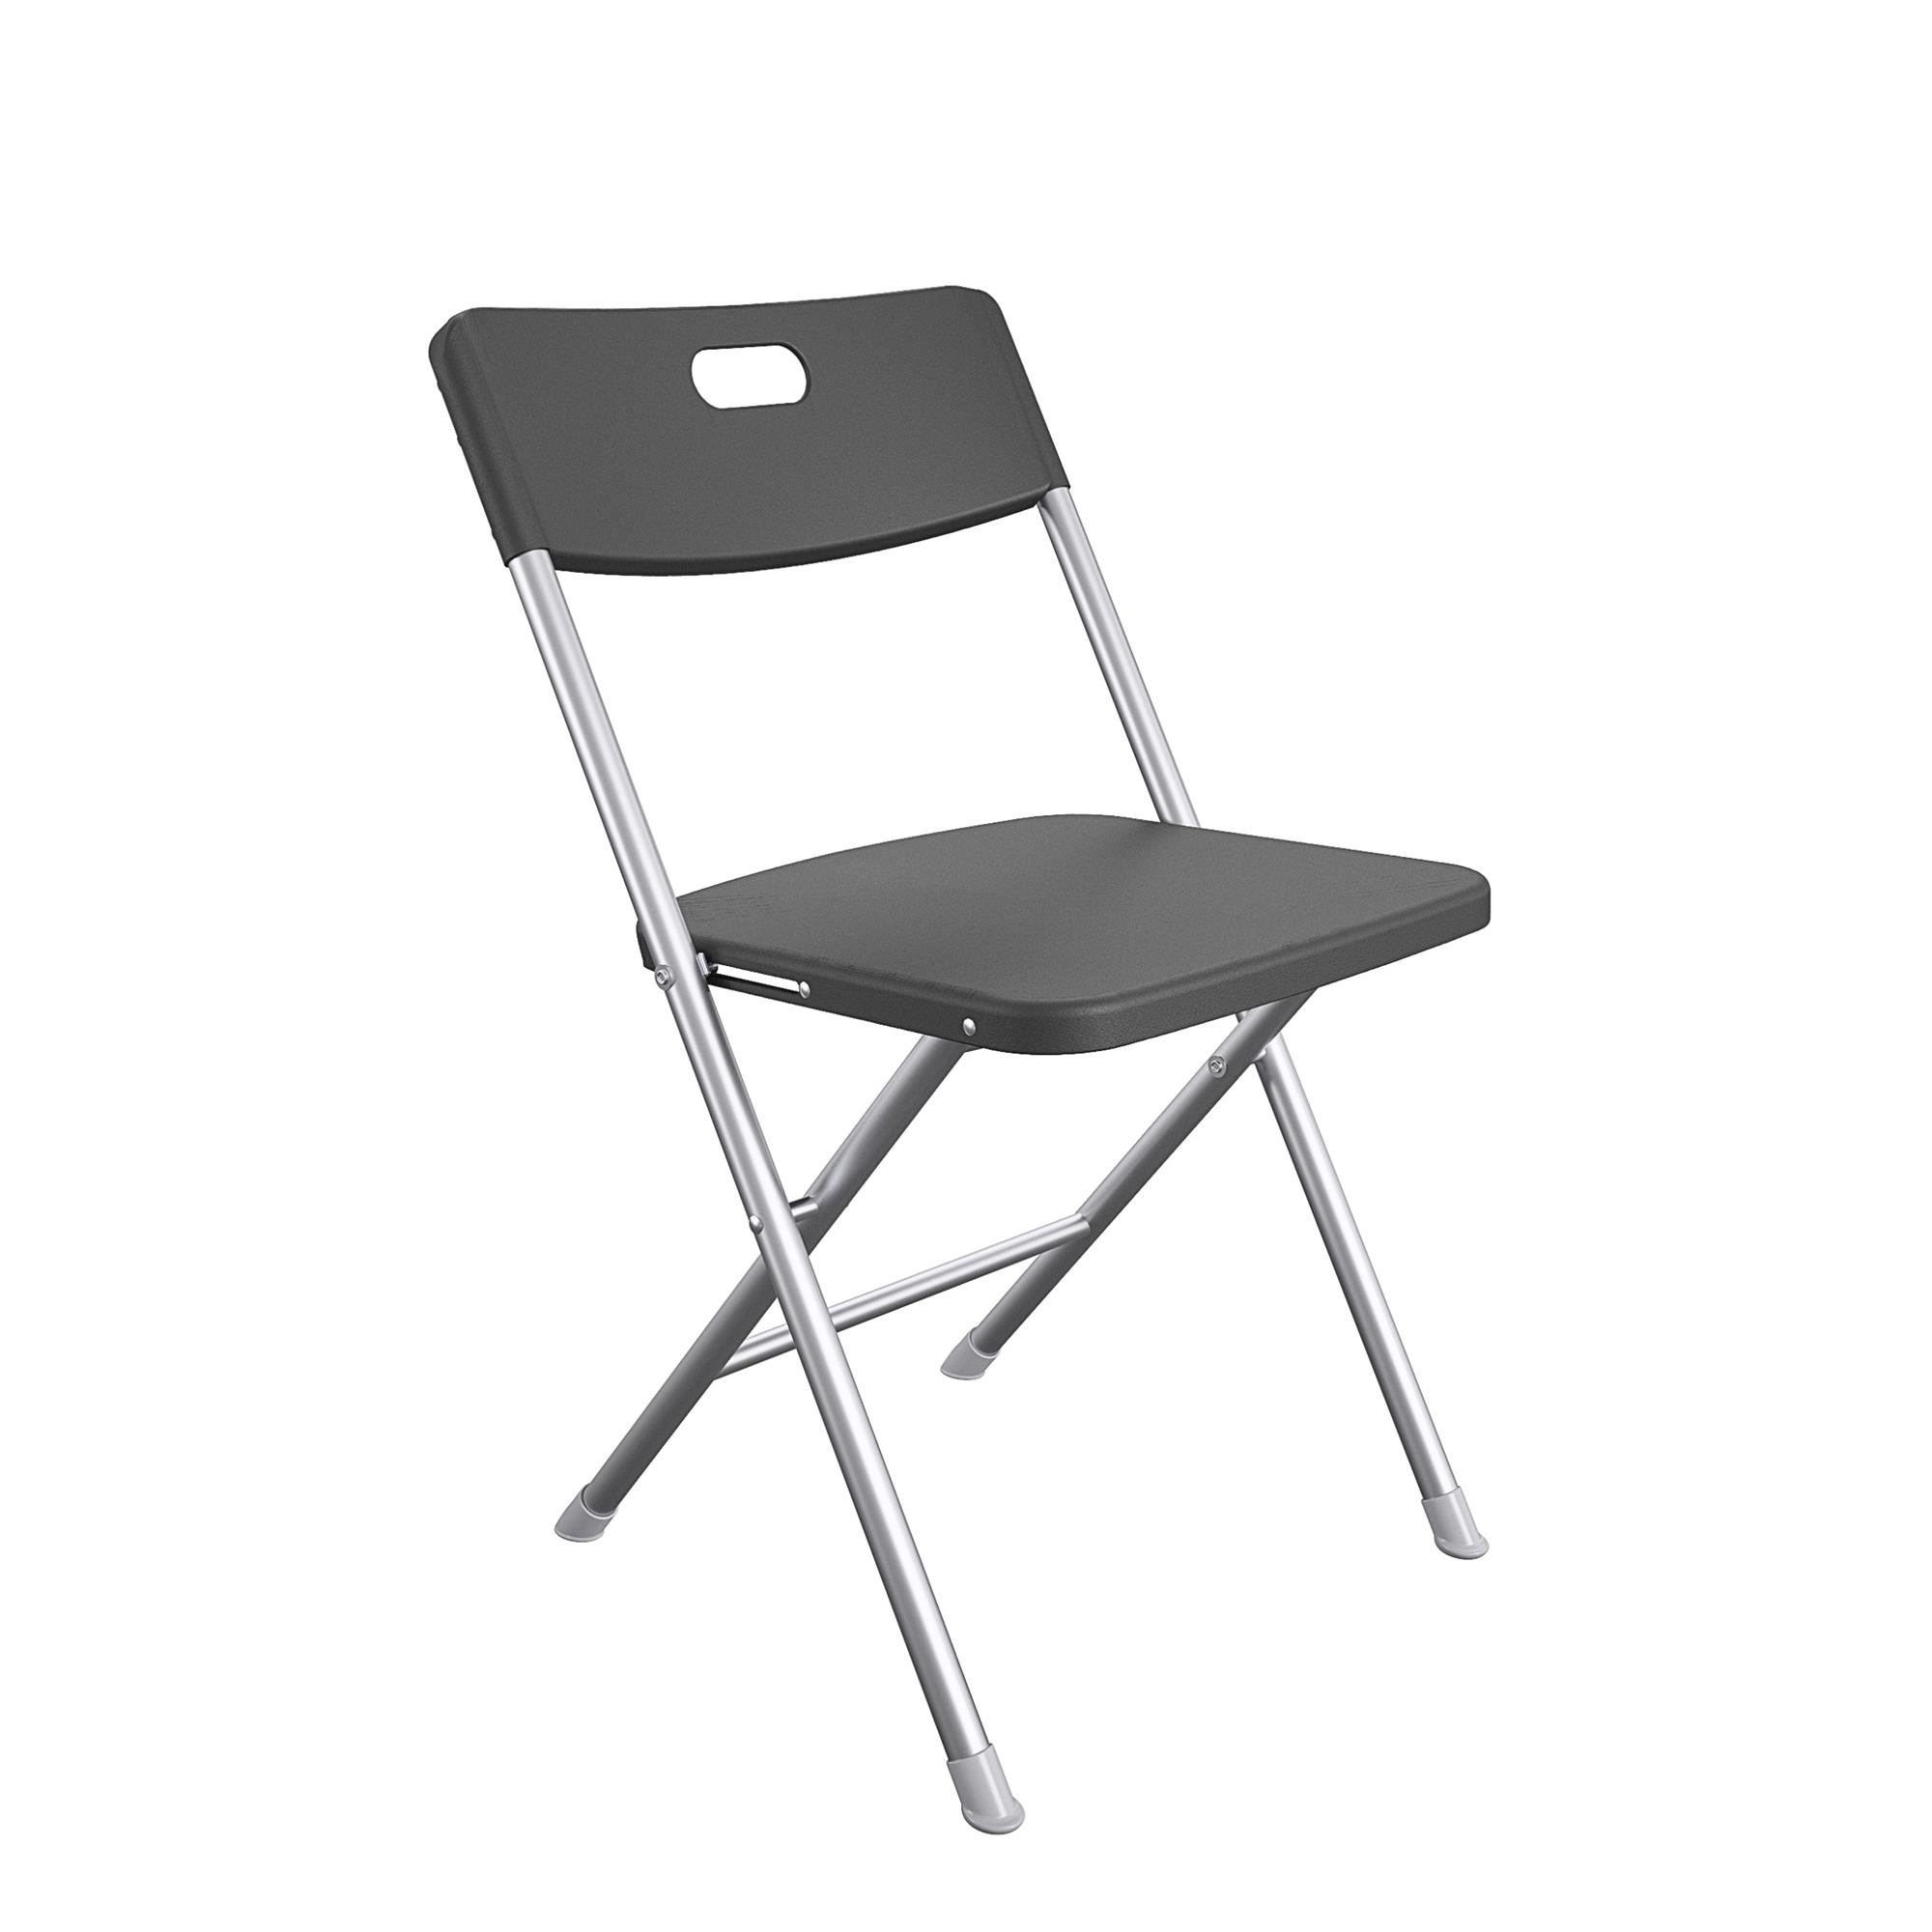 Mainstays Resin Seat & Back Folding Chair, Black - image 1 of 7